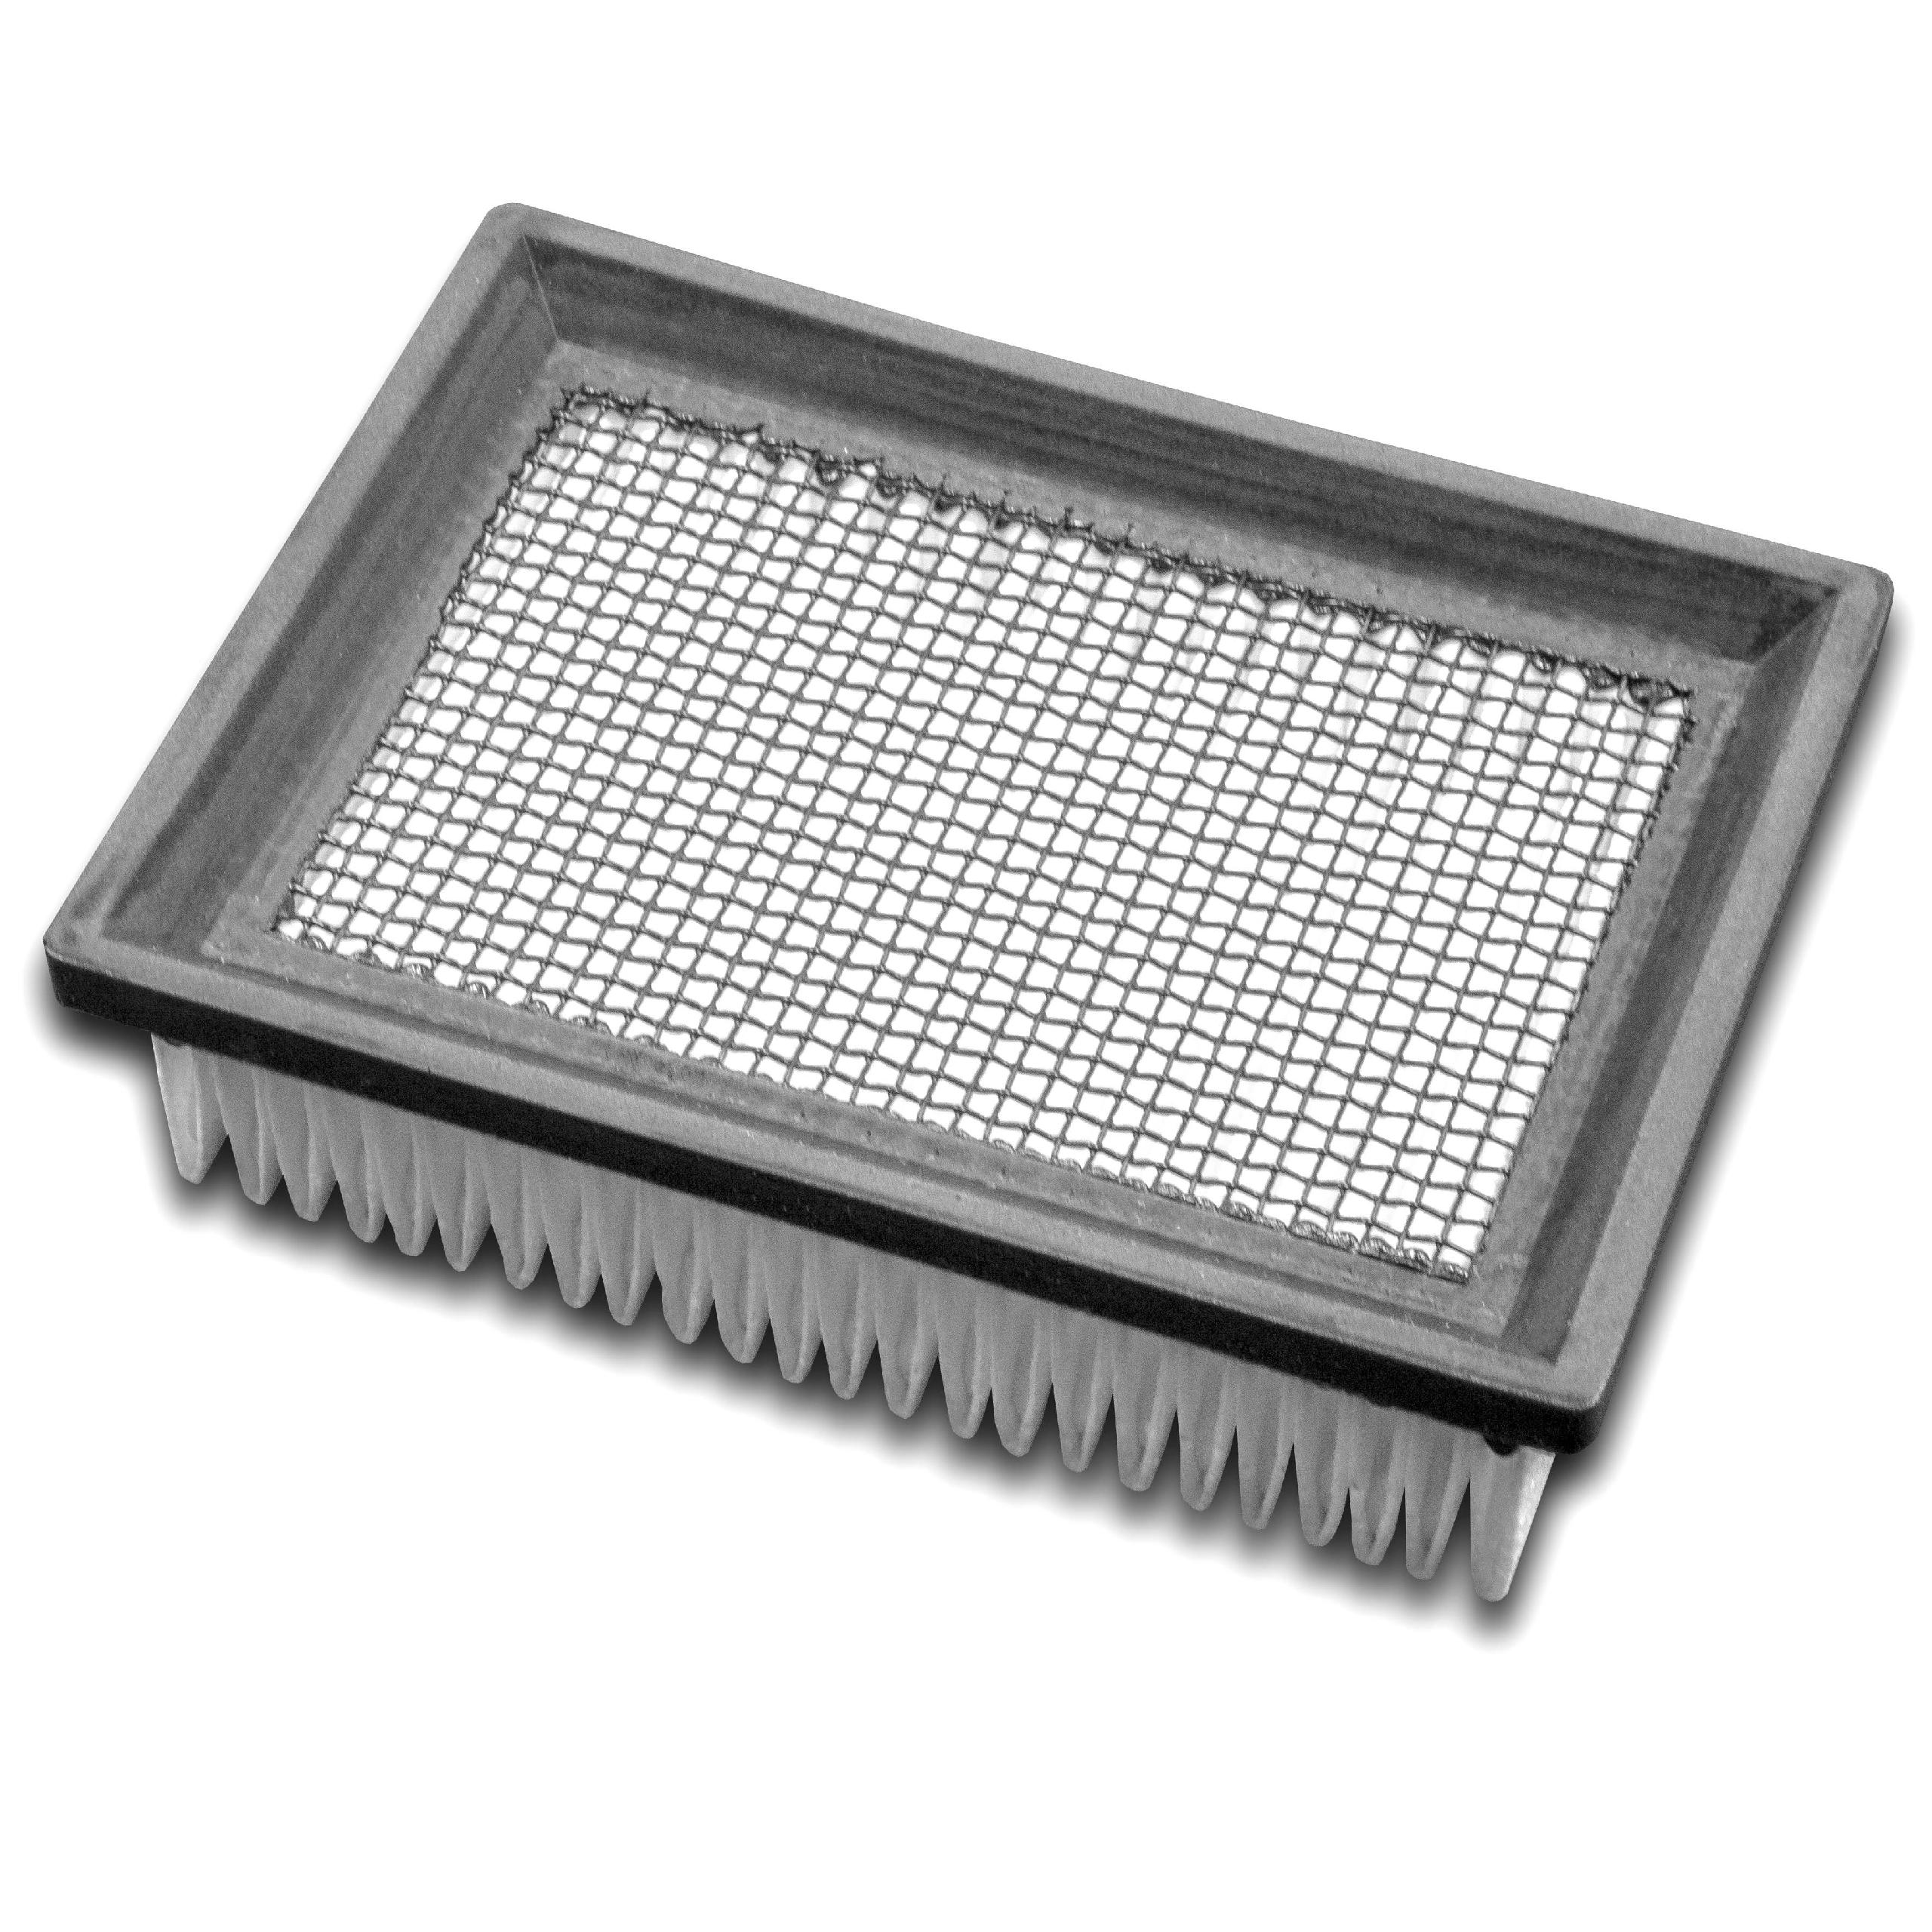 vhbw 1x Filter Replacement for Nobles 370113 for Carpet Sweeper, Floor Scrubber - Air Filter, Spare Filter